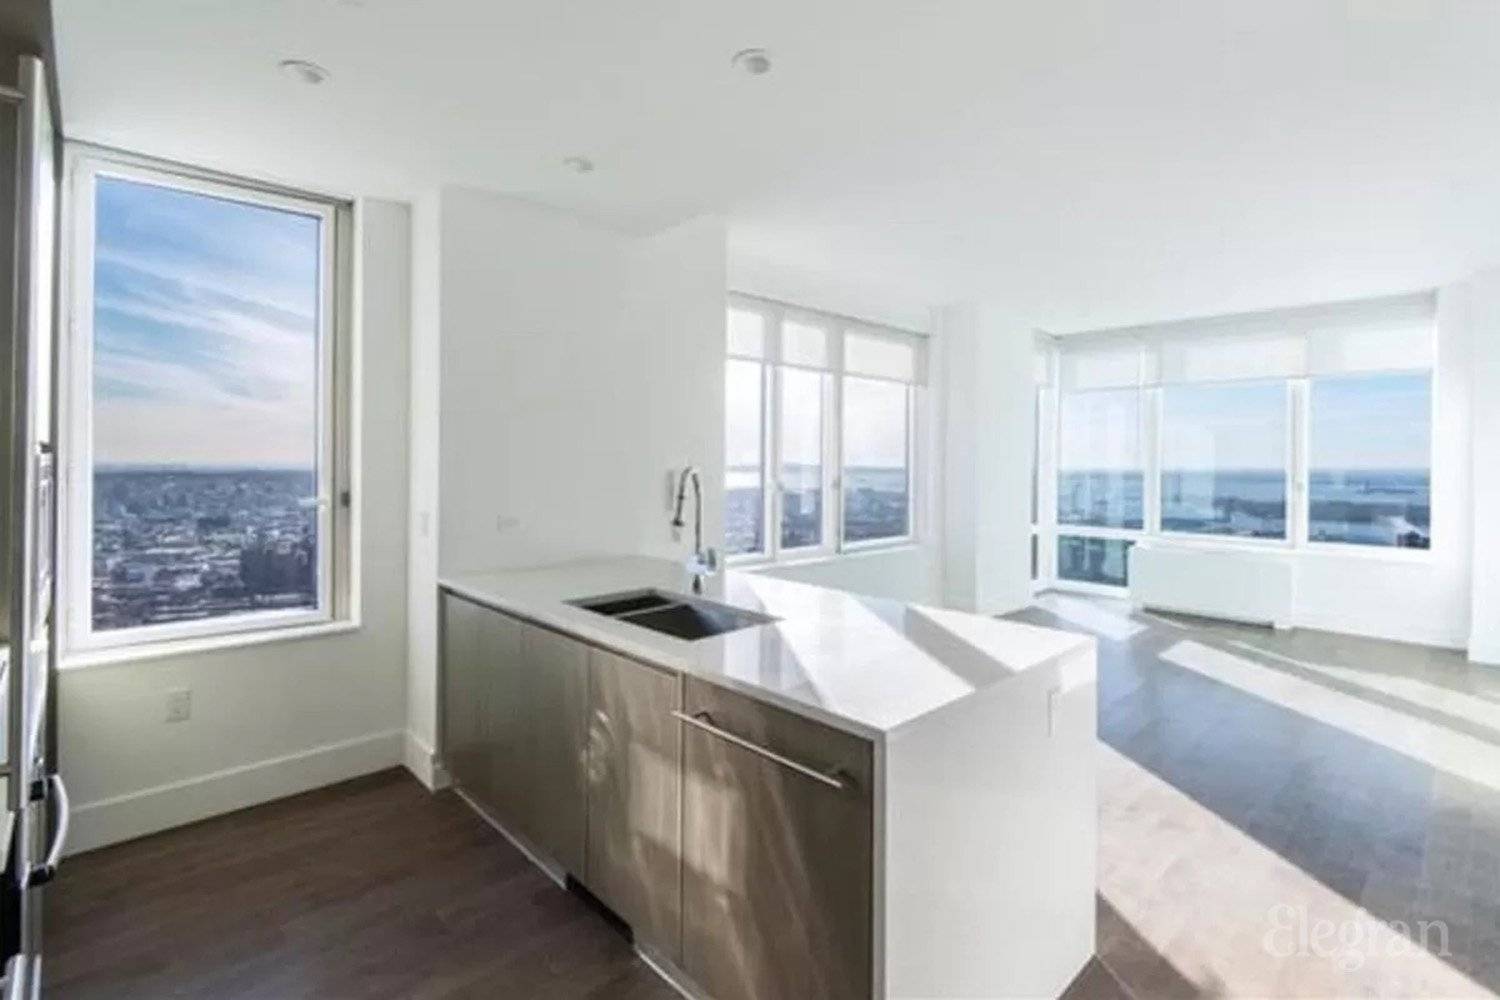 From the 40th floor of Brooklyn s tallest tower, this triple exposure residence offers stunning views of the iconic Manhattan skyline from One World Trade and The Statue of Liberty ...